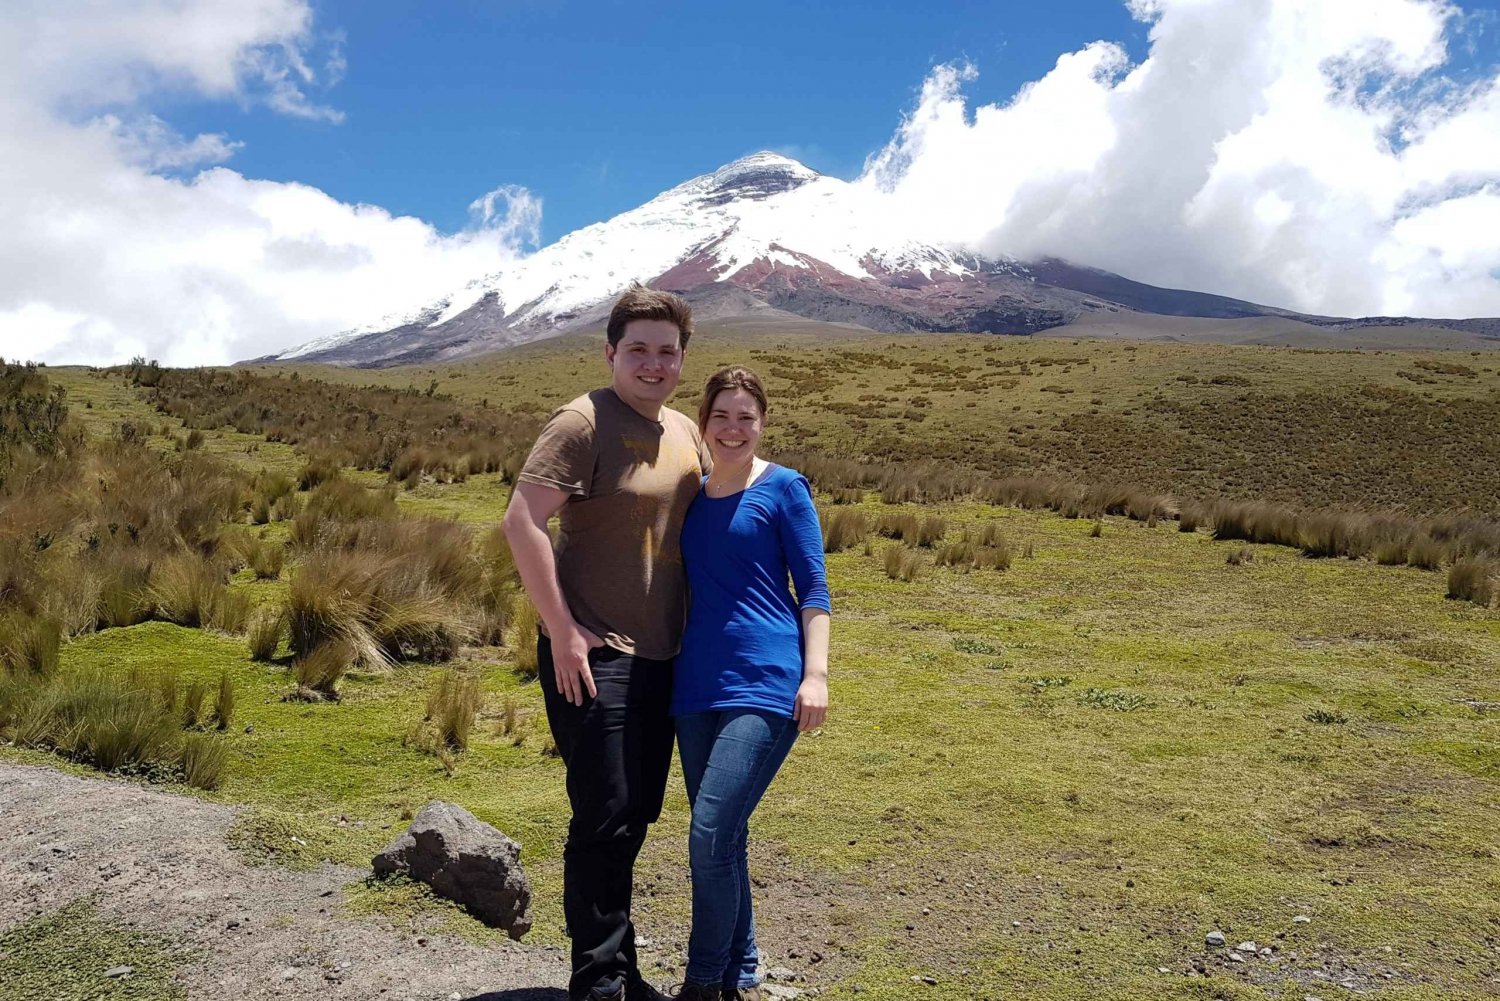 Cotopaxi Park and Papallacta Hot Springs: Lunch Included